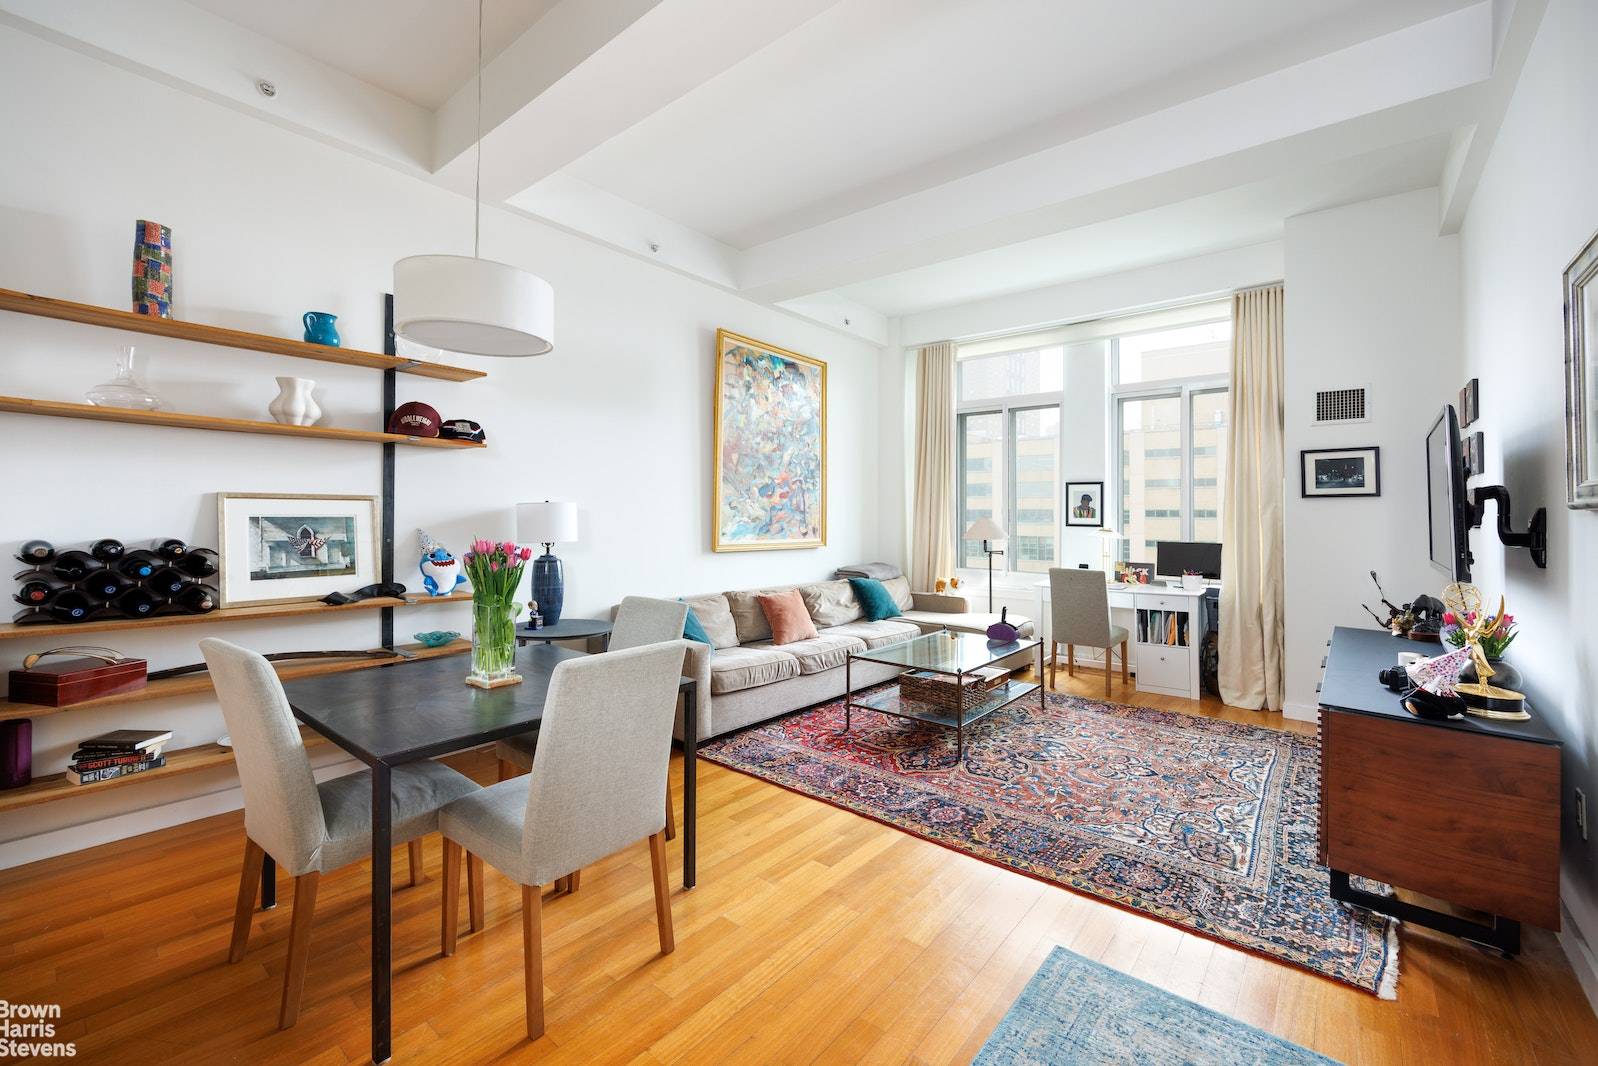 This wonderfully sized one bedroom nestled in the heart of Dumbo will have you rethinking city living.